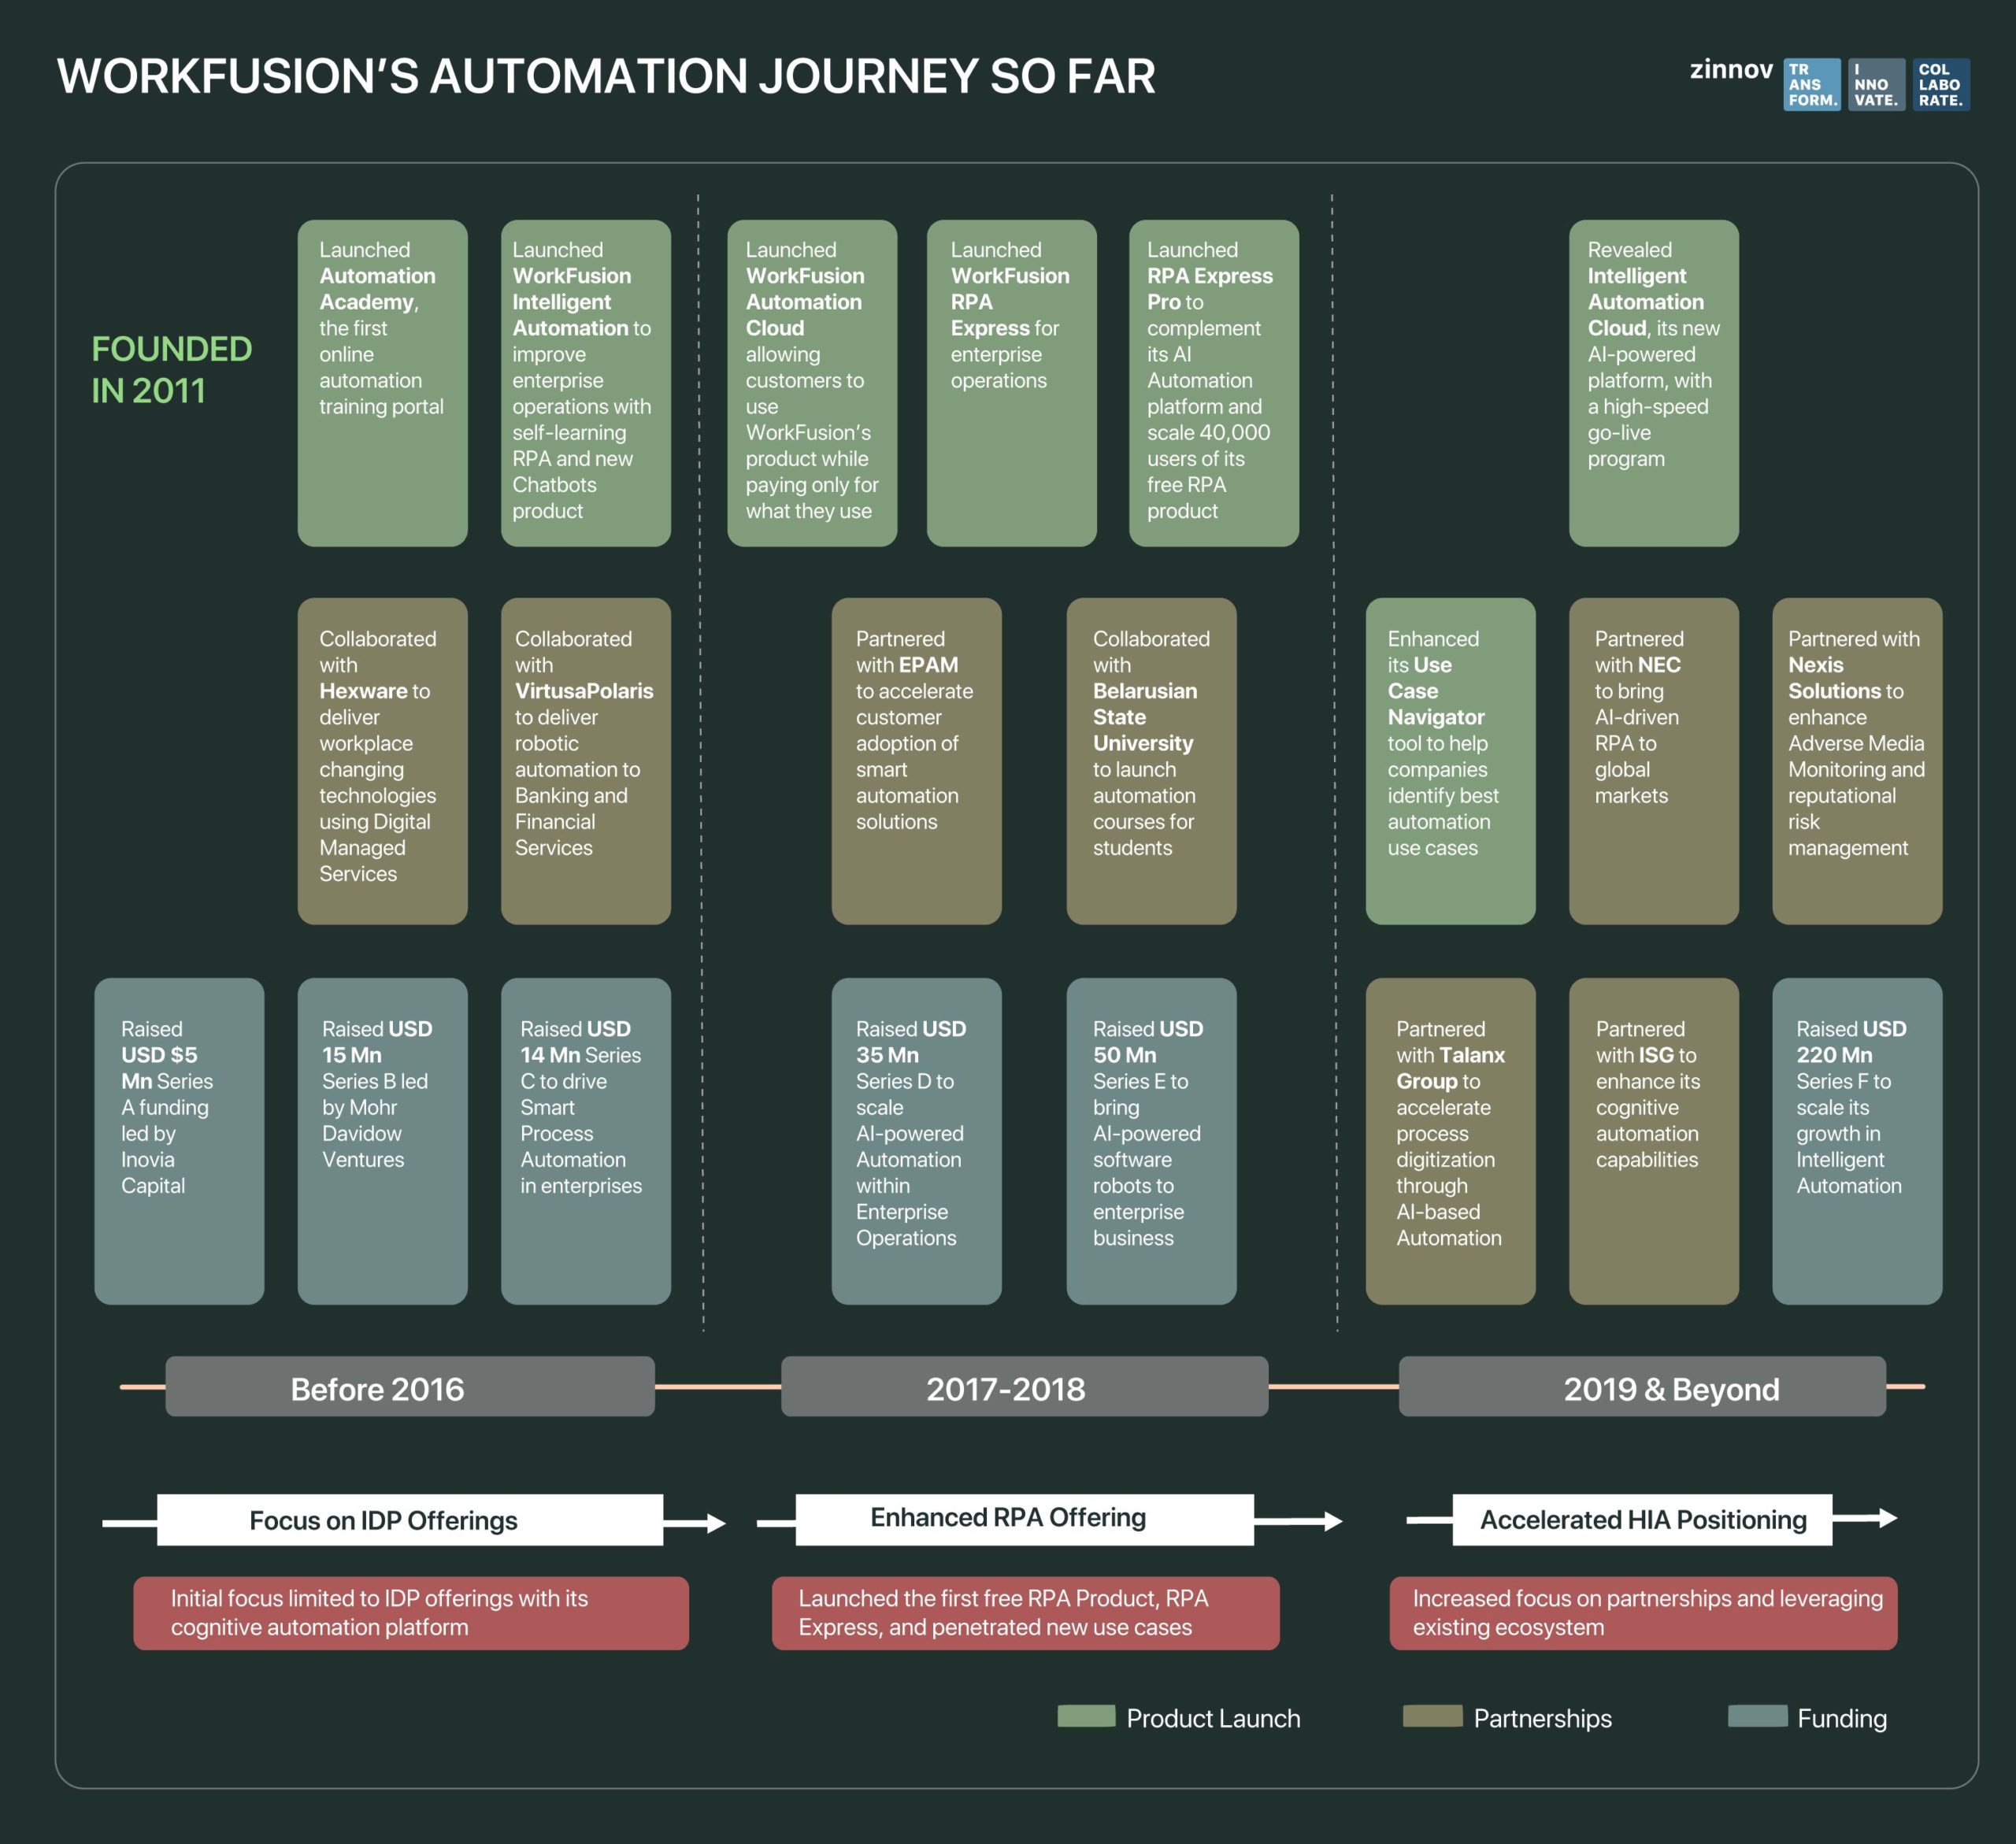 WorkFusion's automation journey so far